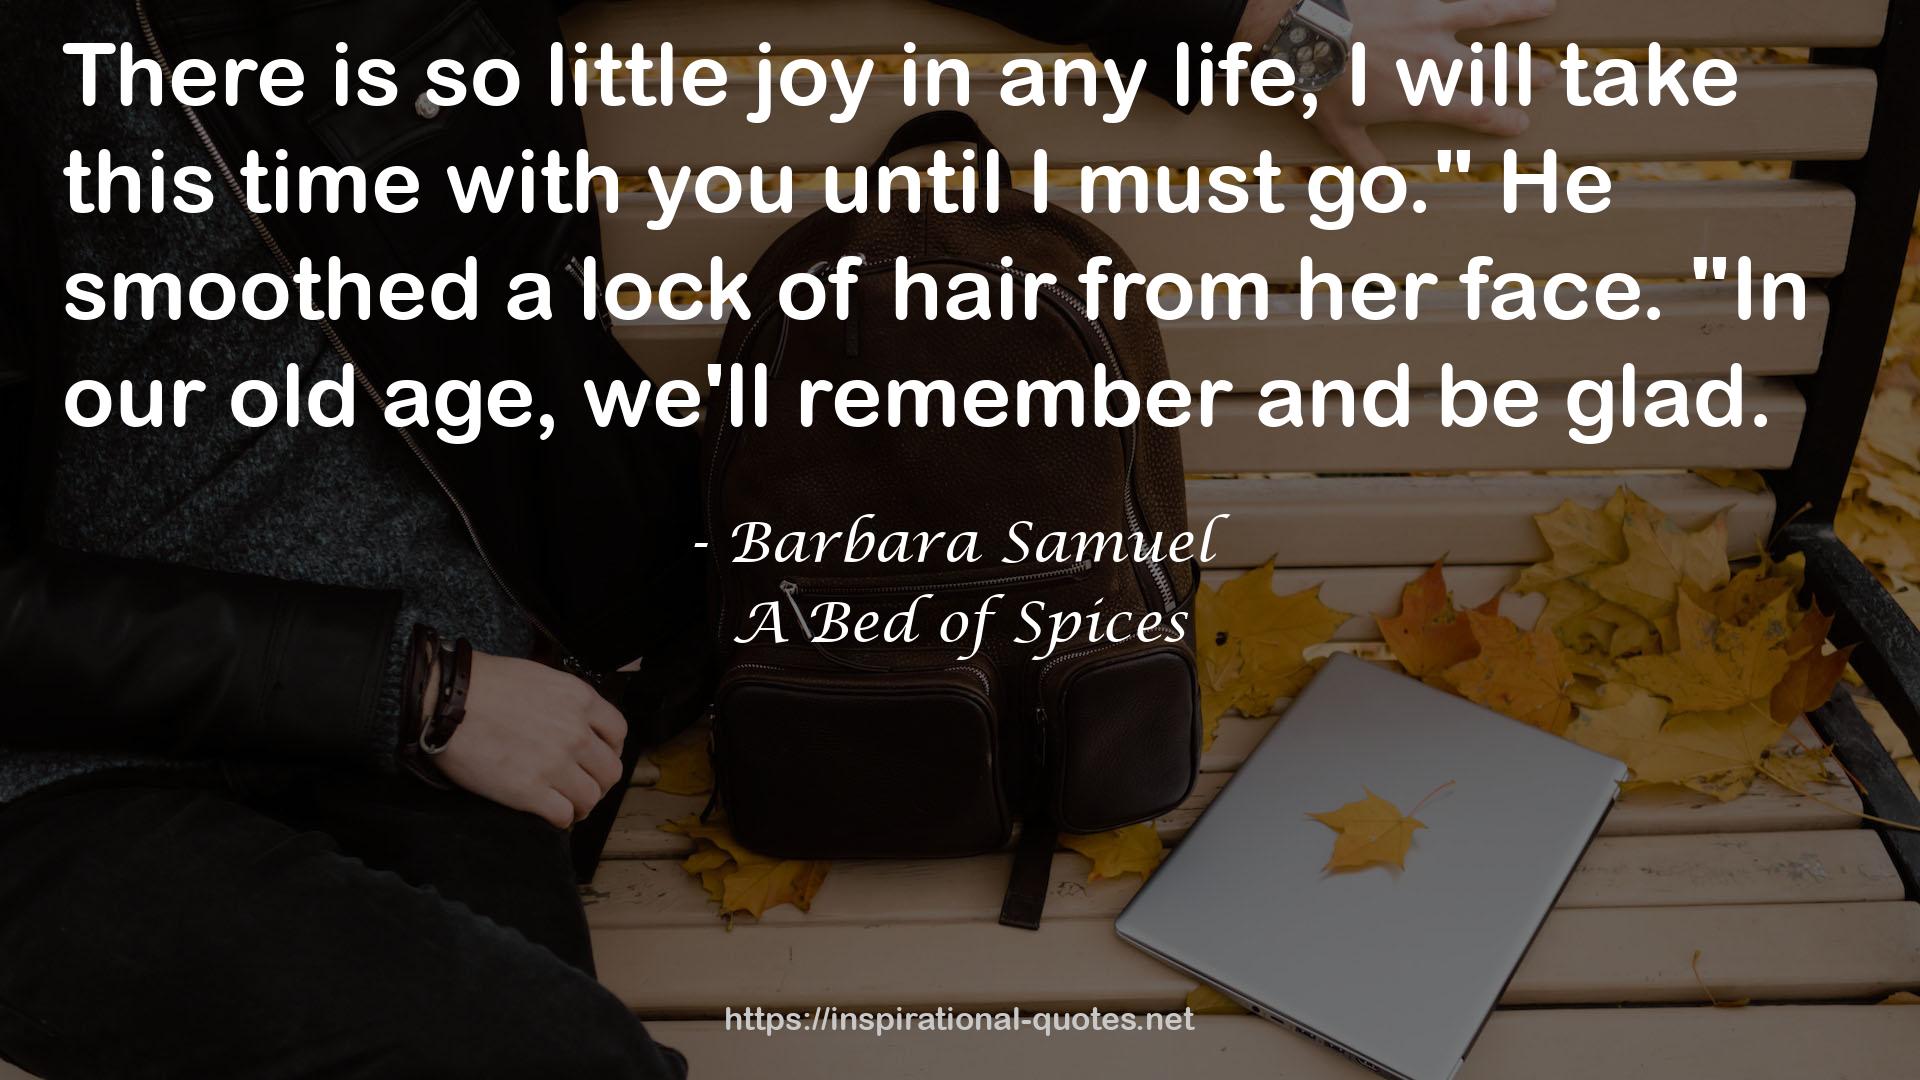 A Bed of Spices QUOTES